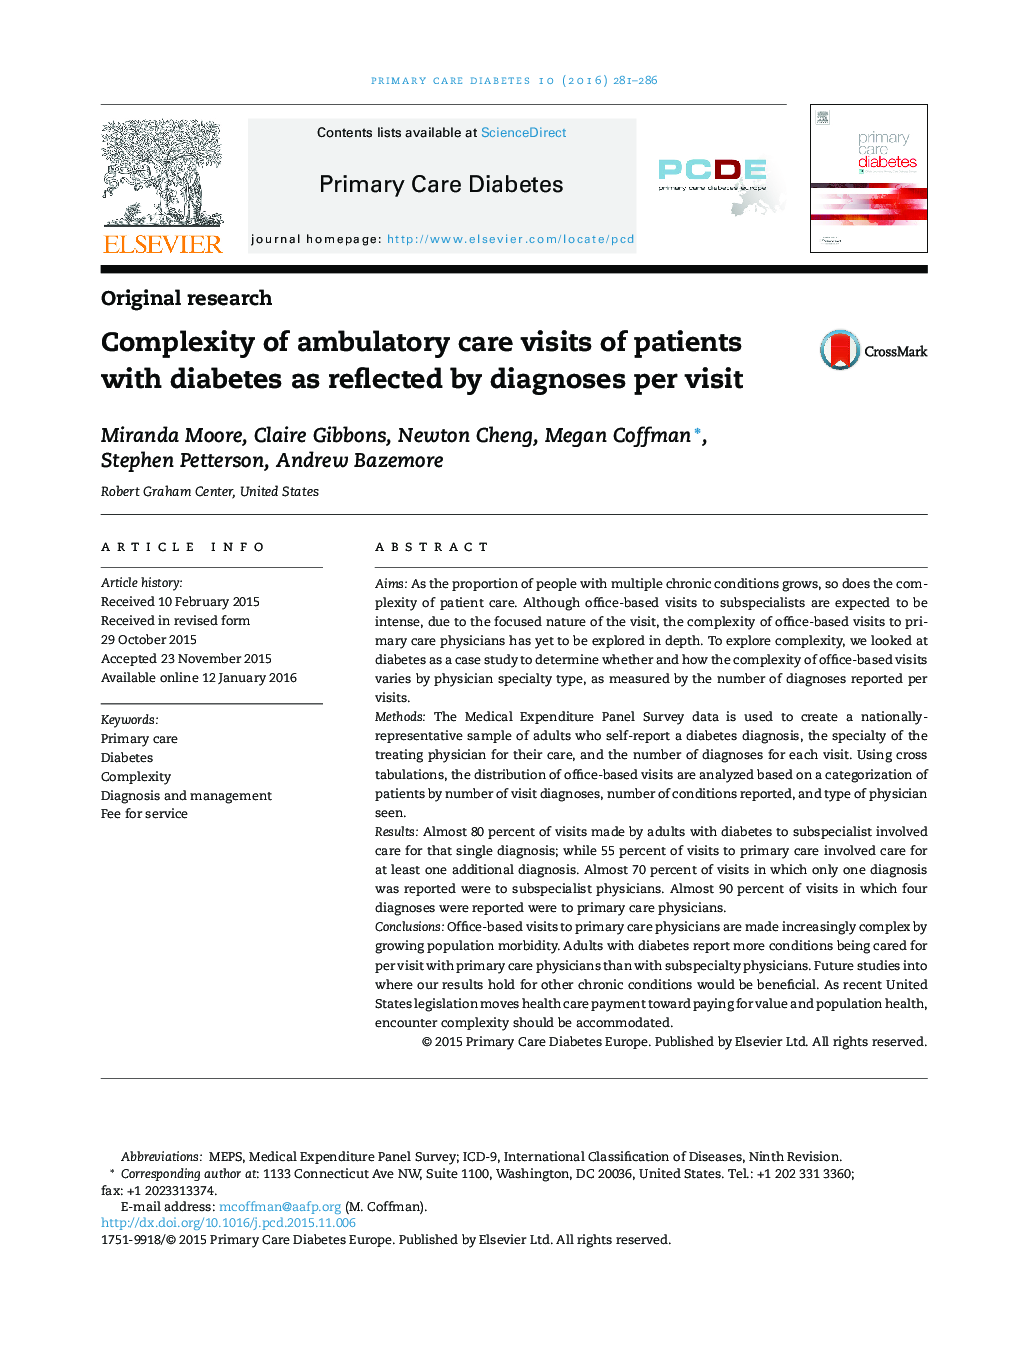 Complexity of ambulatory care visits of patients with diabetes as reflected by diagnoses per visit